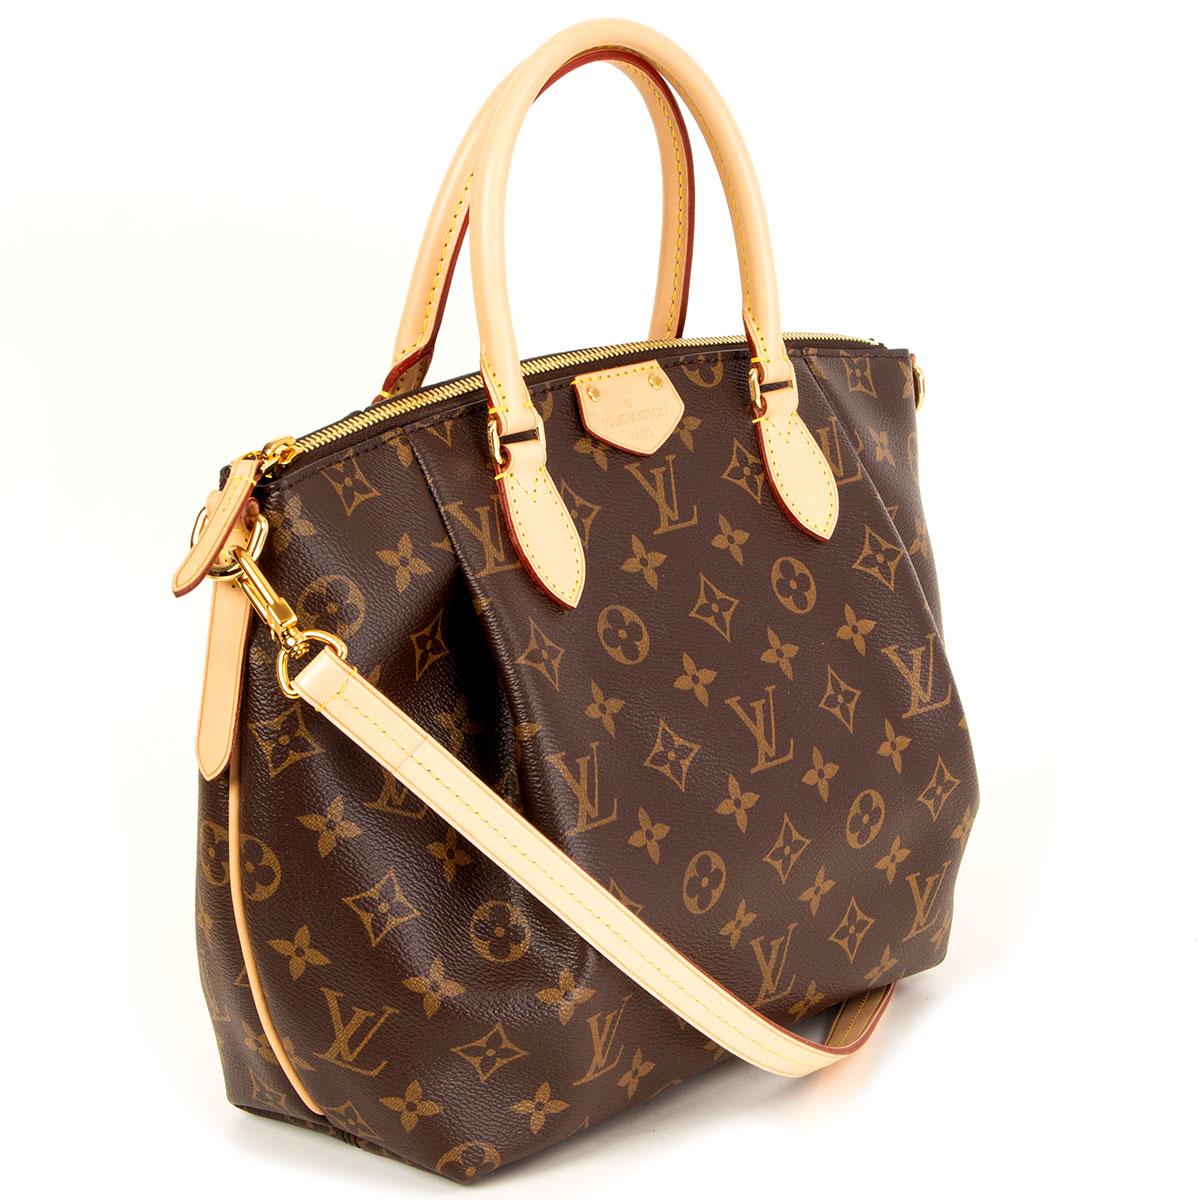 Louis Vuitton Turenne Pm - For Sale on 1stDibs